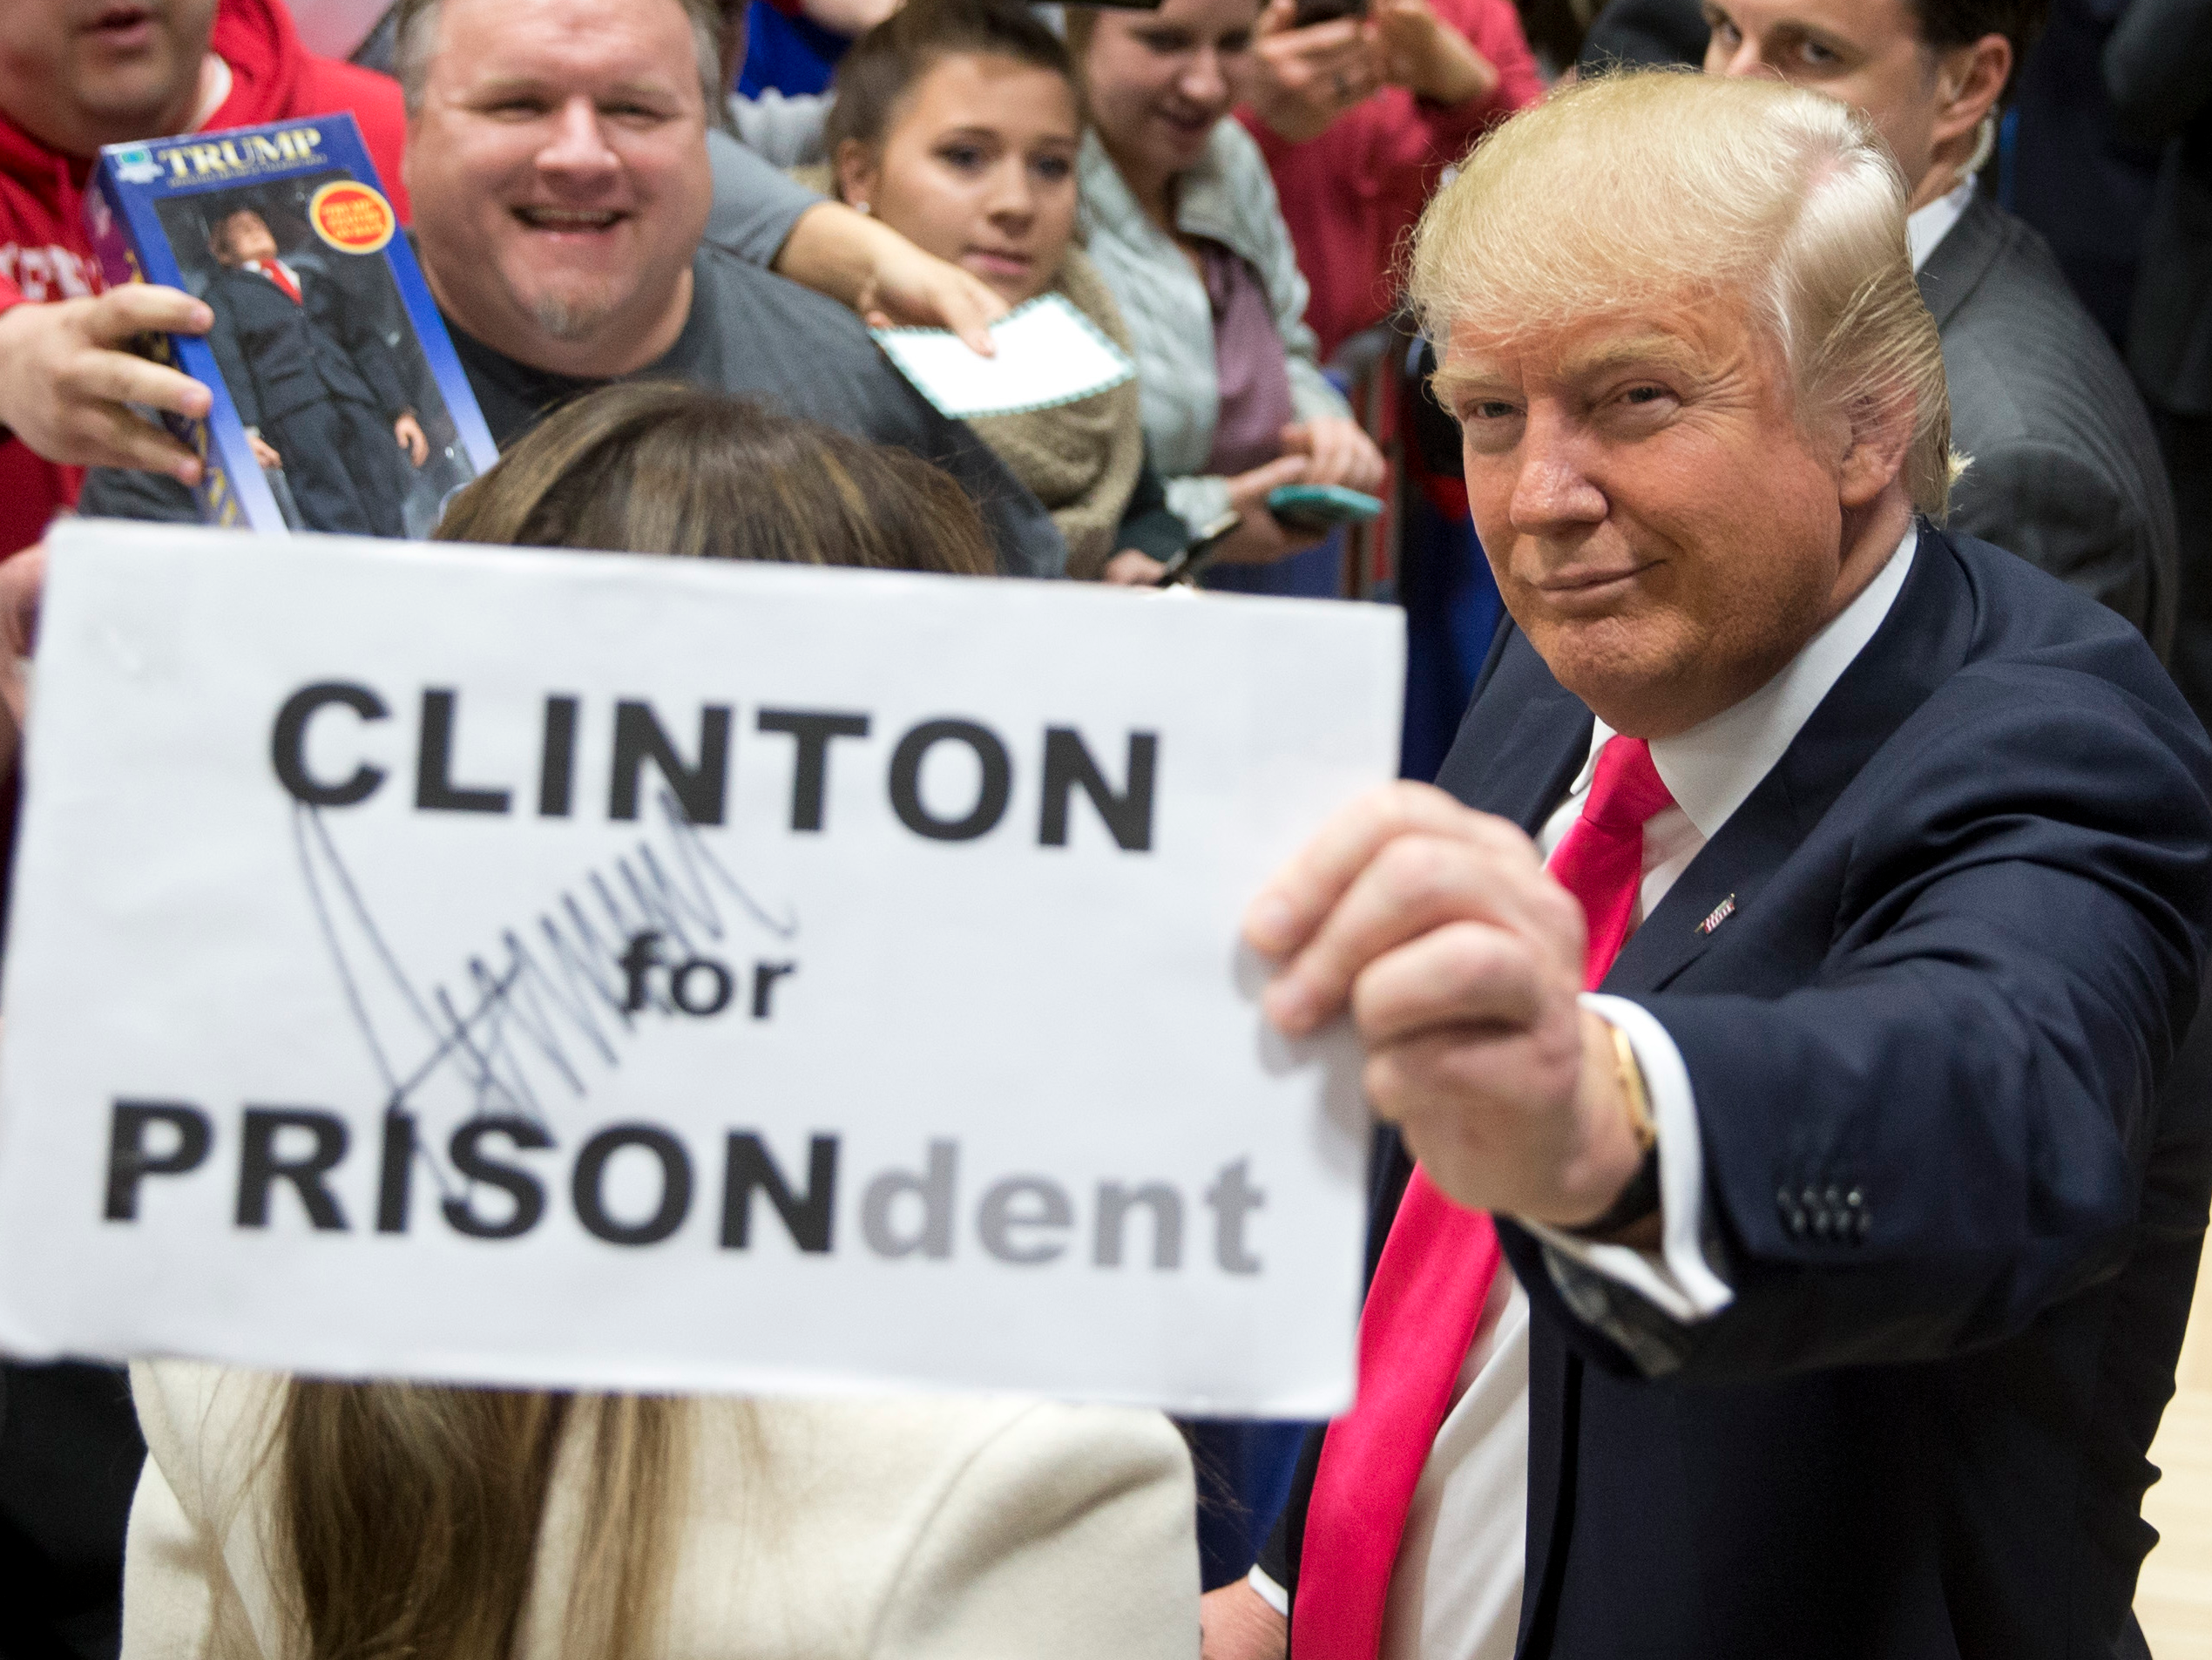 3-photos-of-donald-trump-holding-up-a-hillary-clinton-for-prison-sign.jpg